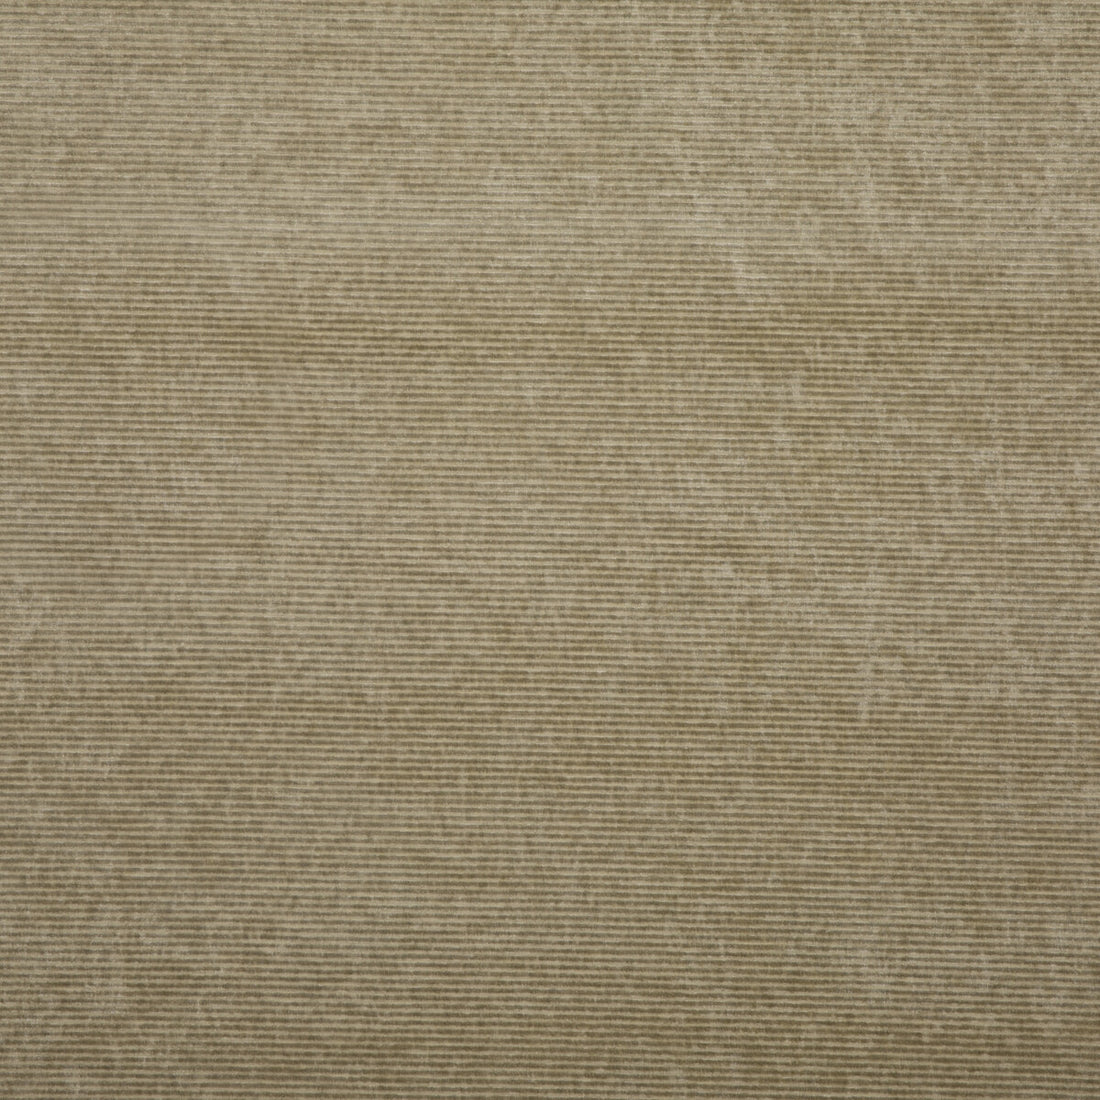 Kendal Velvet fabric in sand color - pattern BF10761.130.0 - by G P &amp; J Baker in the Keswick Velvets collection